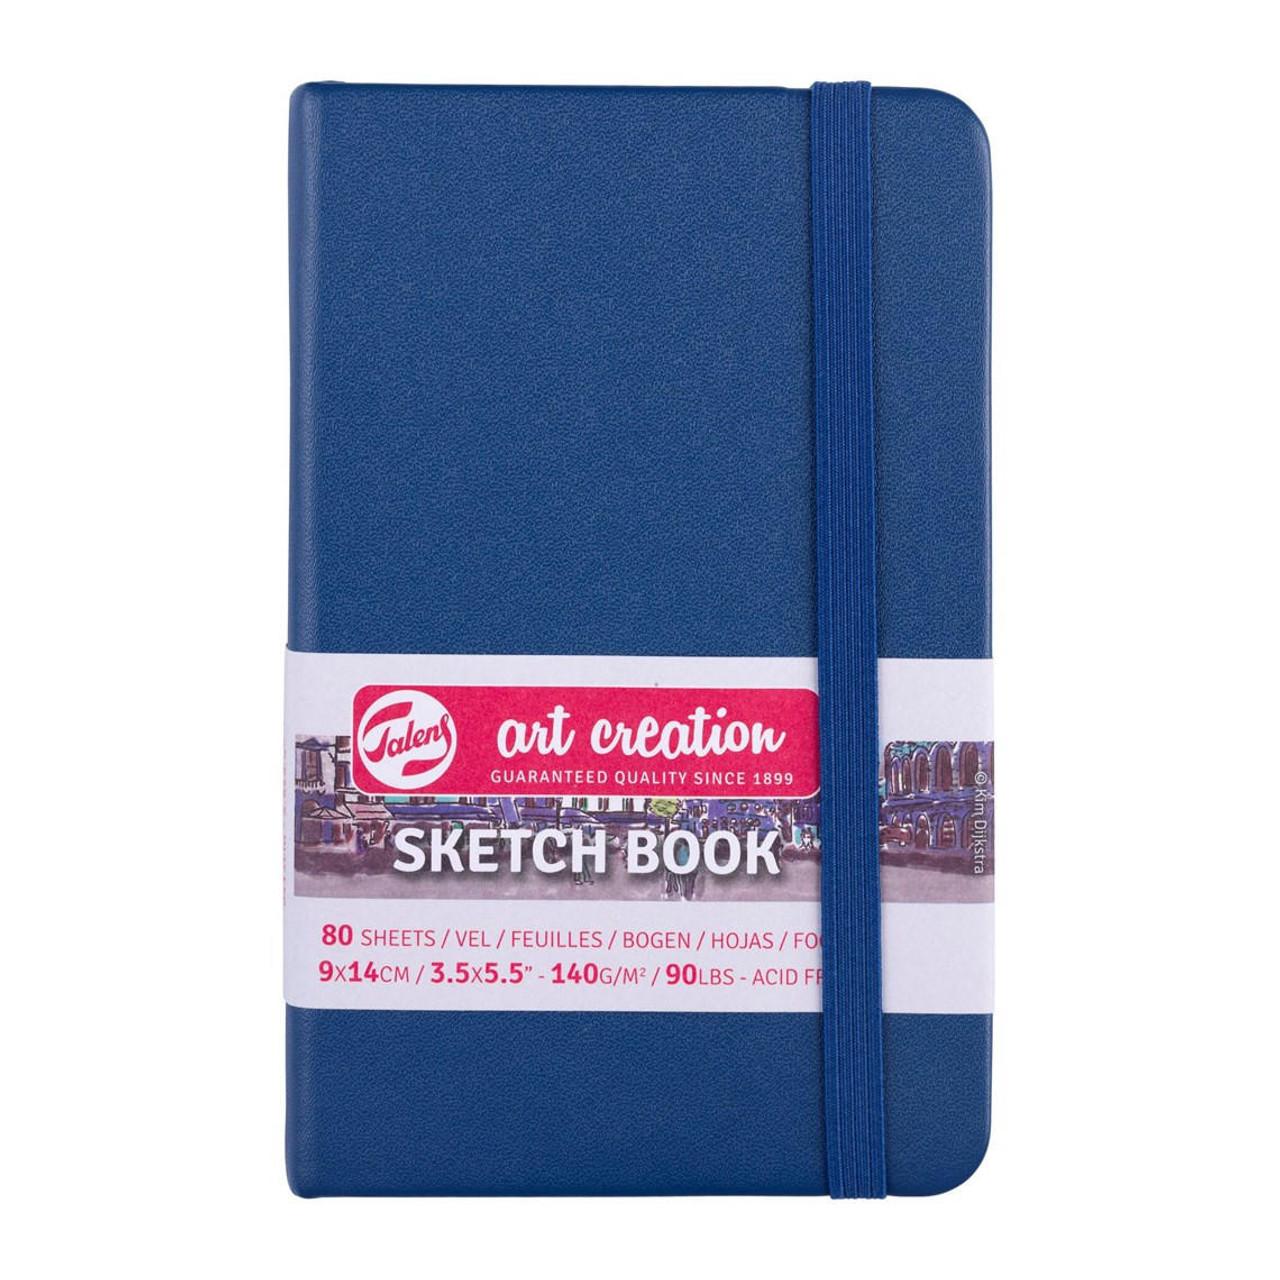 Talens Art Creation Sketchbook First Impressions Review 